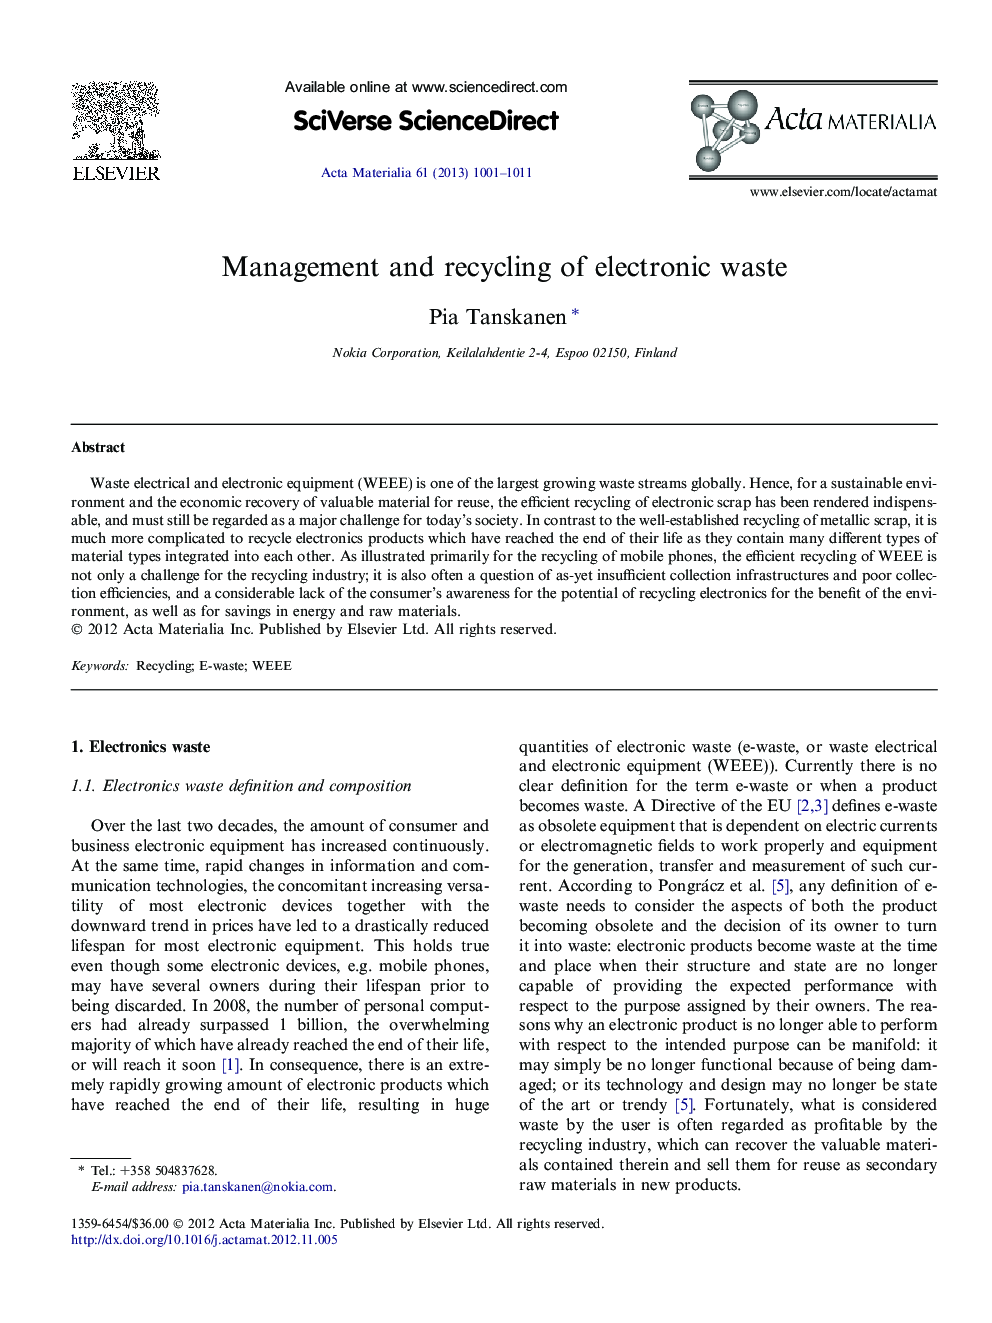 Management and recycling of electronic waste